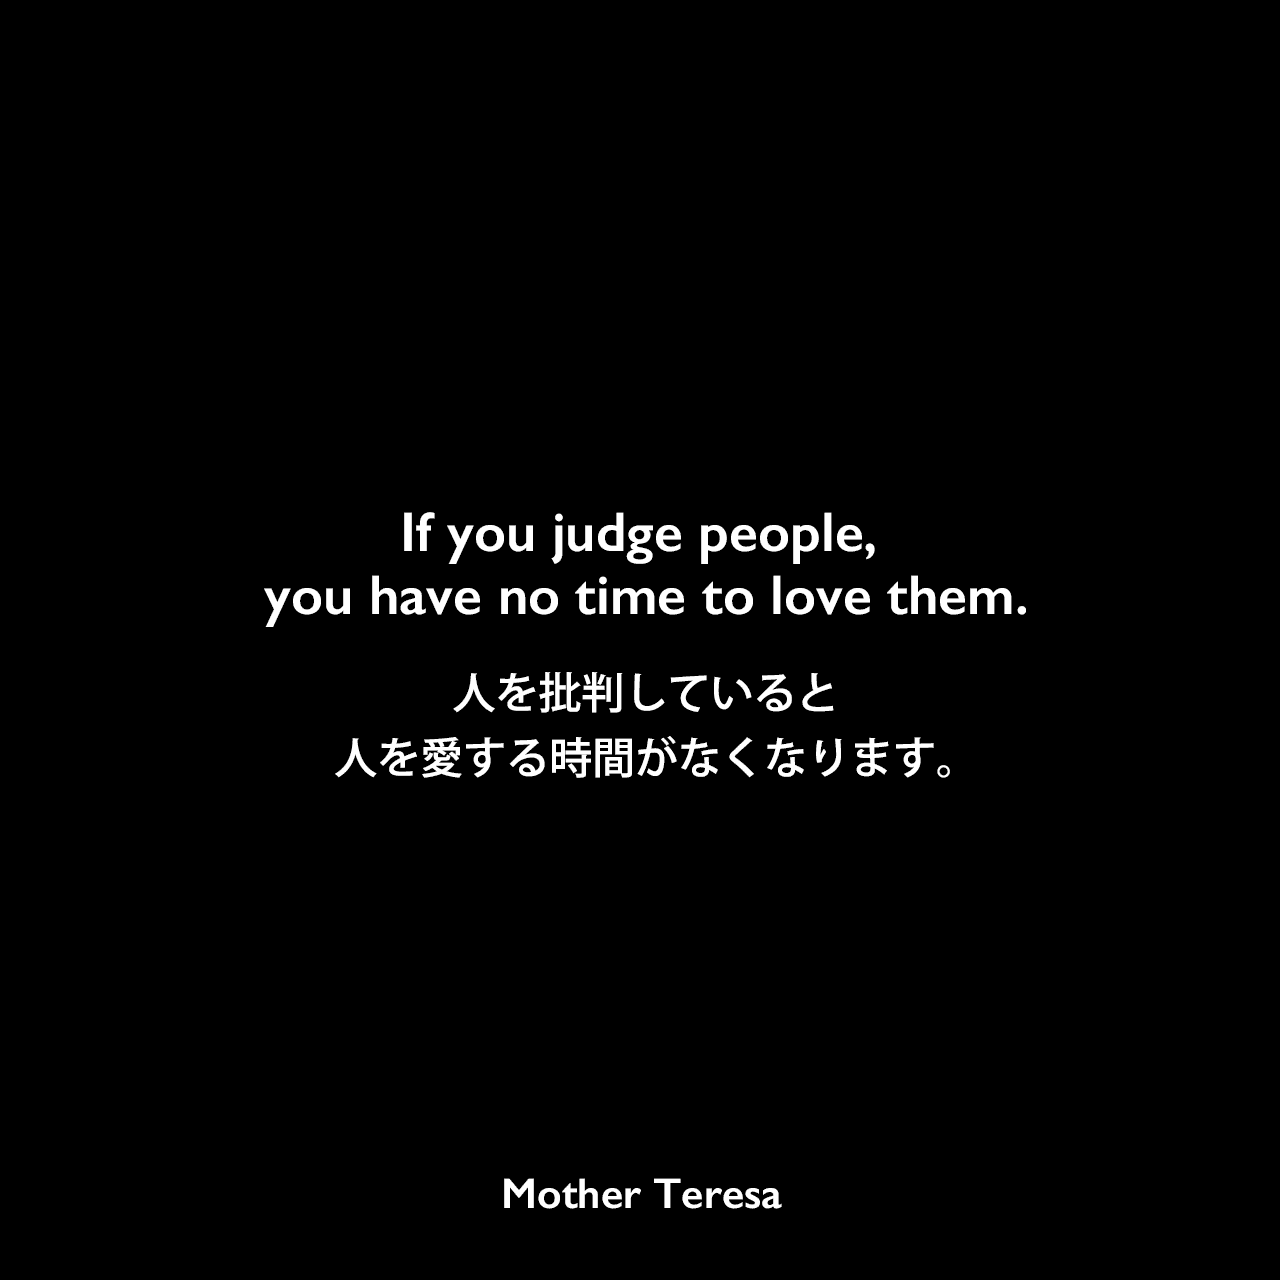 If you judge people, you have no time to love them.人を批判していると、人を愛する時間がなくなります。Mother Teresa